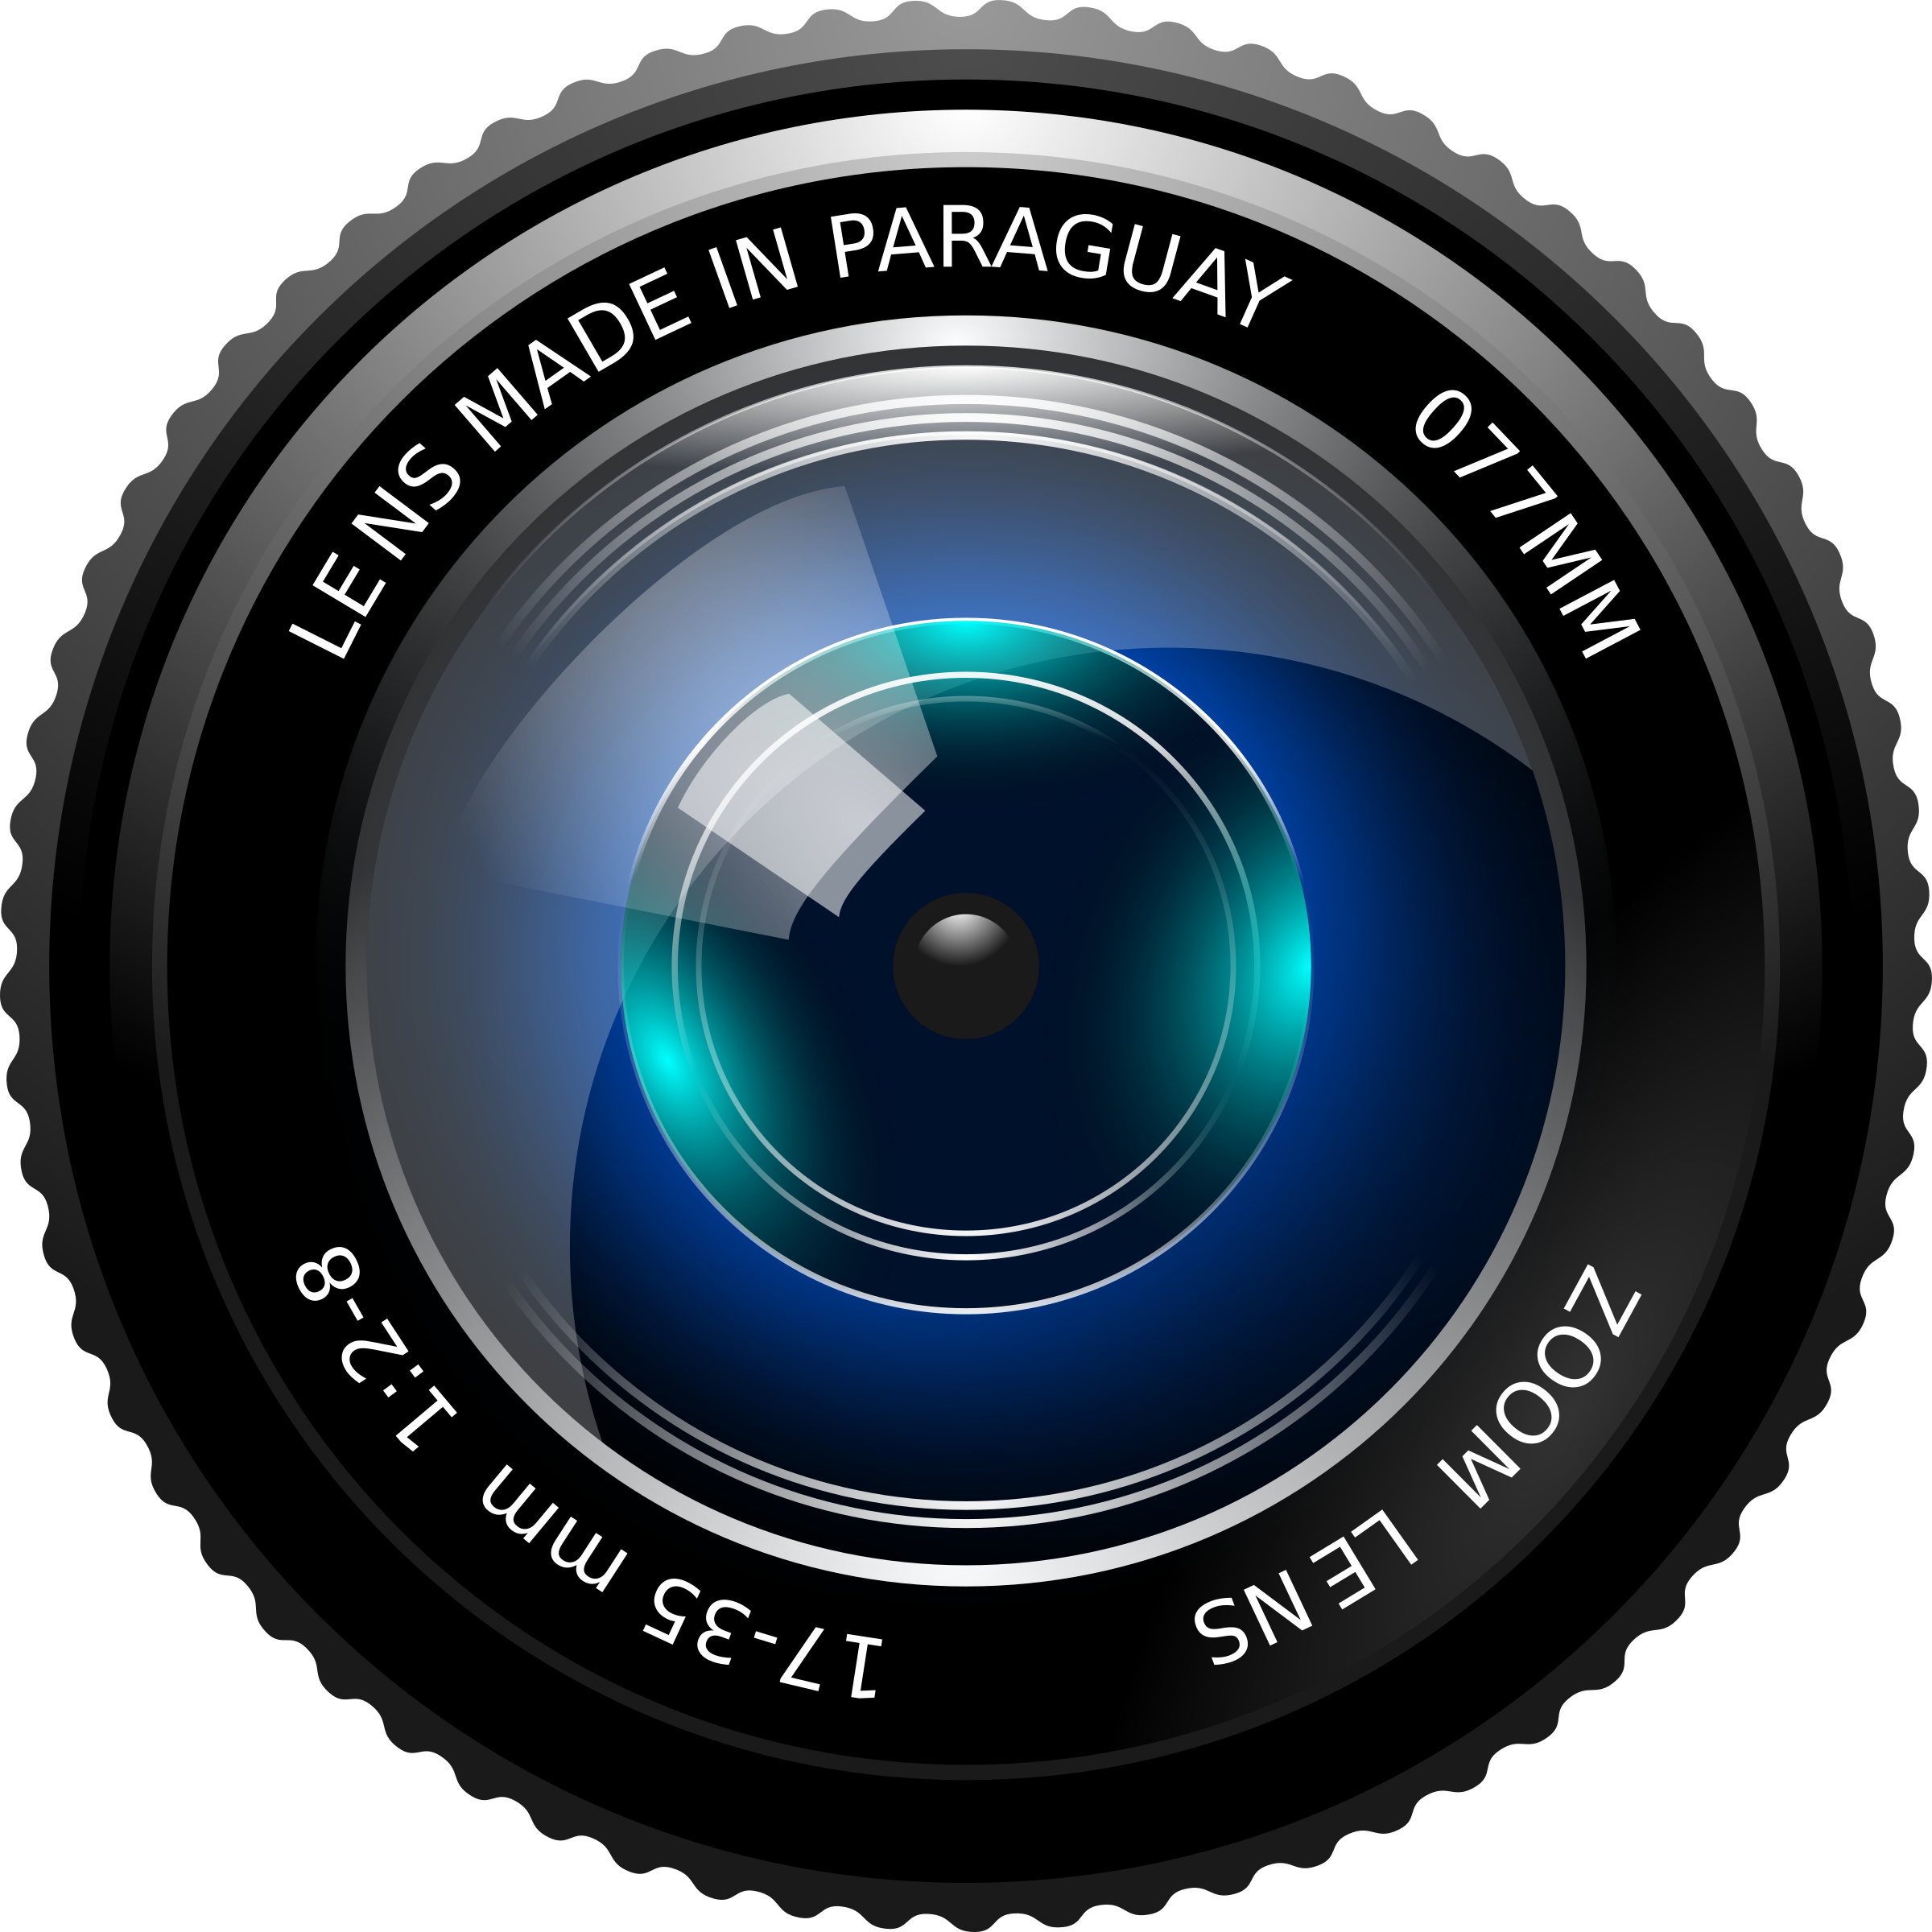 camera lens icon png